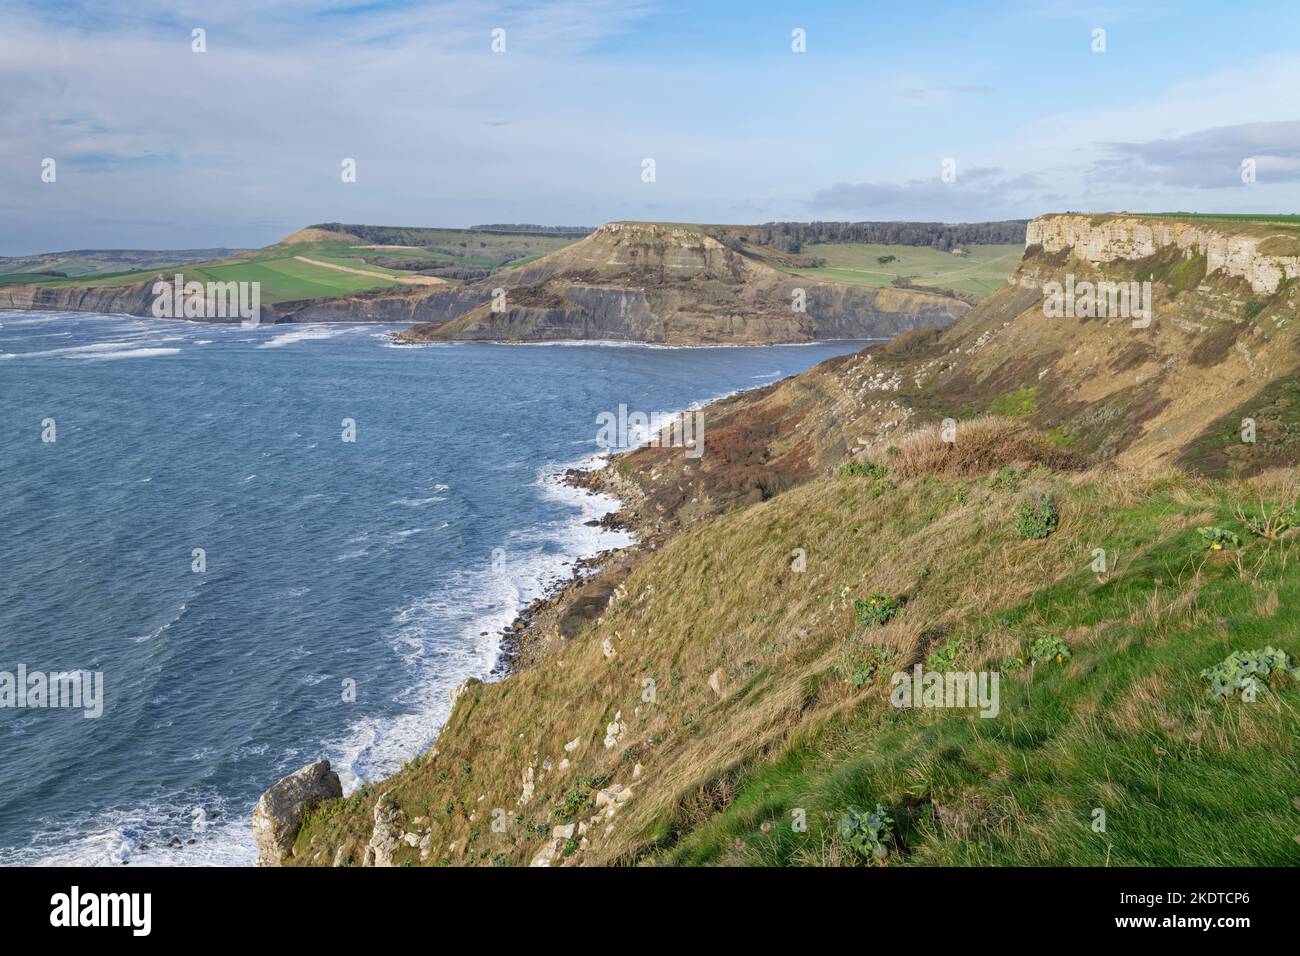 View north to Emmet’s Hill cliffs and Egremont Point from St. Aldhelm’s Head, near Worth Matravers, Isle of Purbeck, Dorset, UK, January. Stock Photo